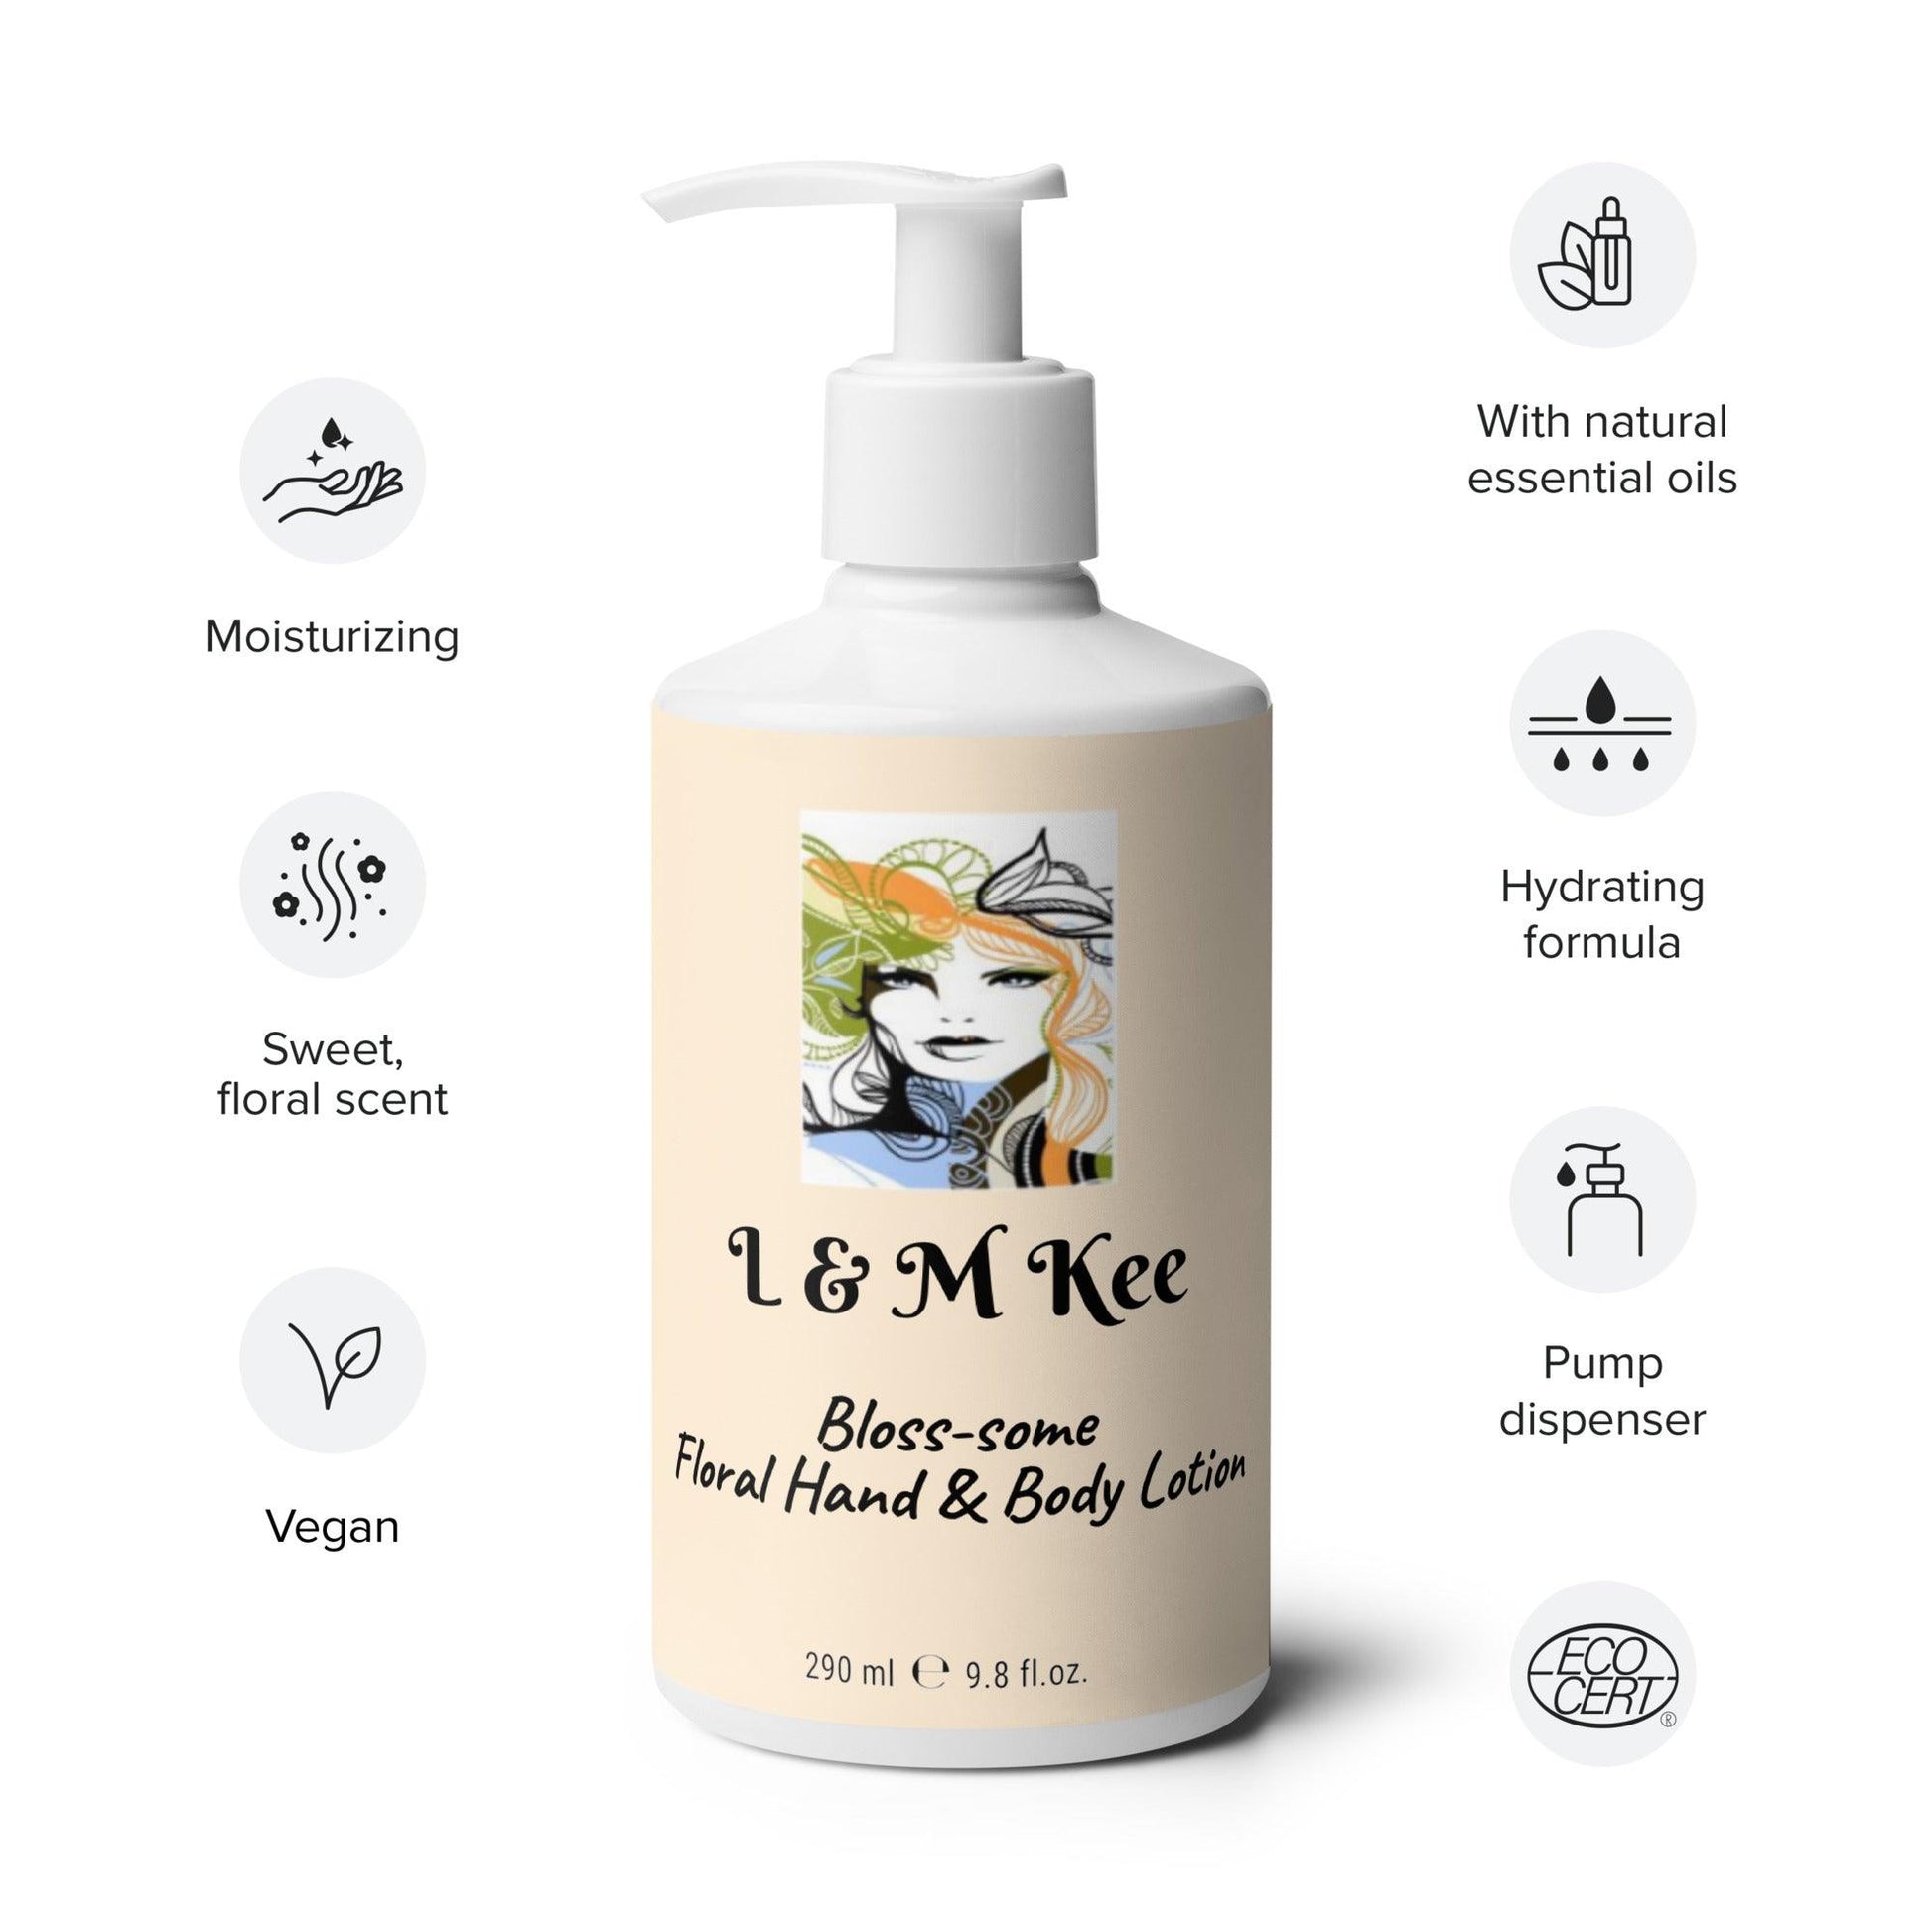 Bloss-some Floral Hand & Body Lotion - L & M Kee, LLC